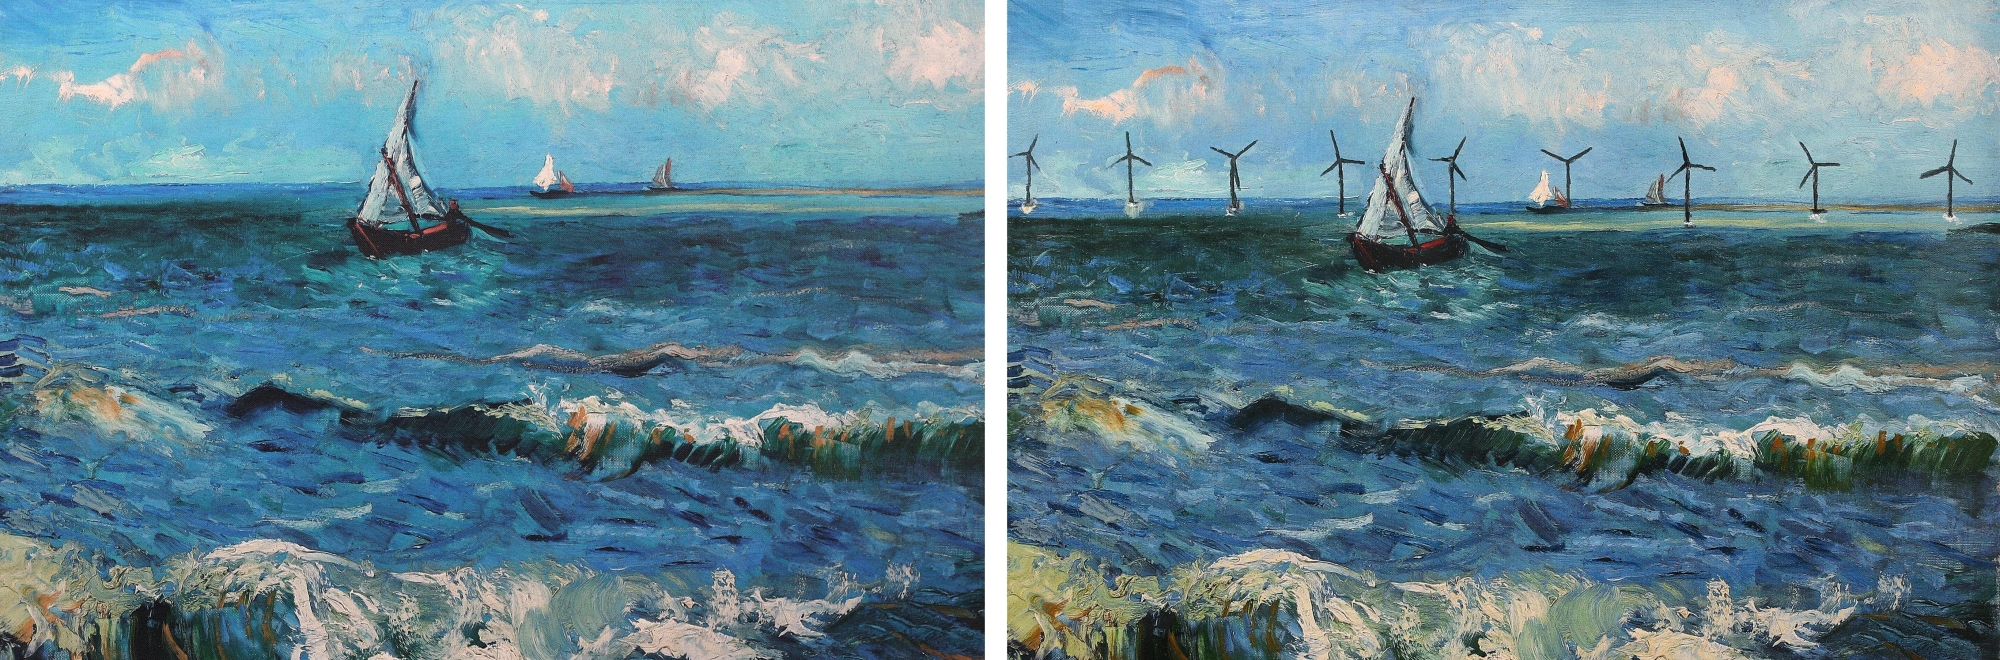 Famous paintings in history reimagined to reflect the possibilities of a zero carbon shipping industry